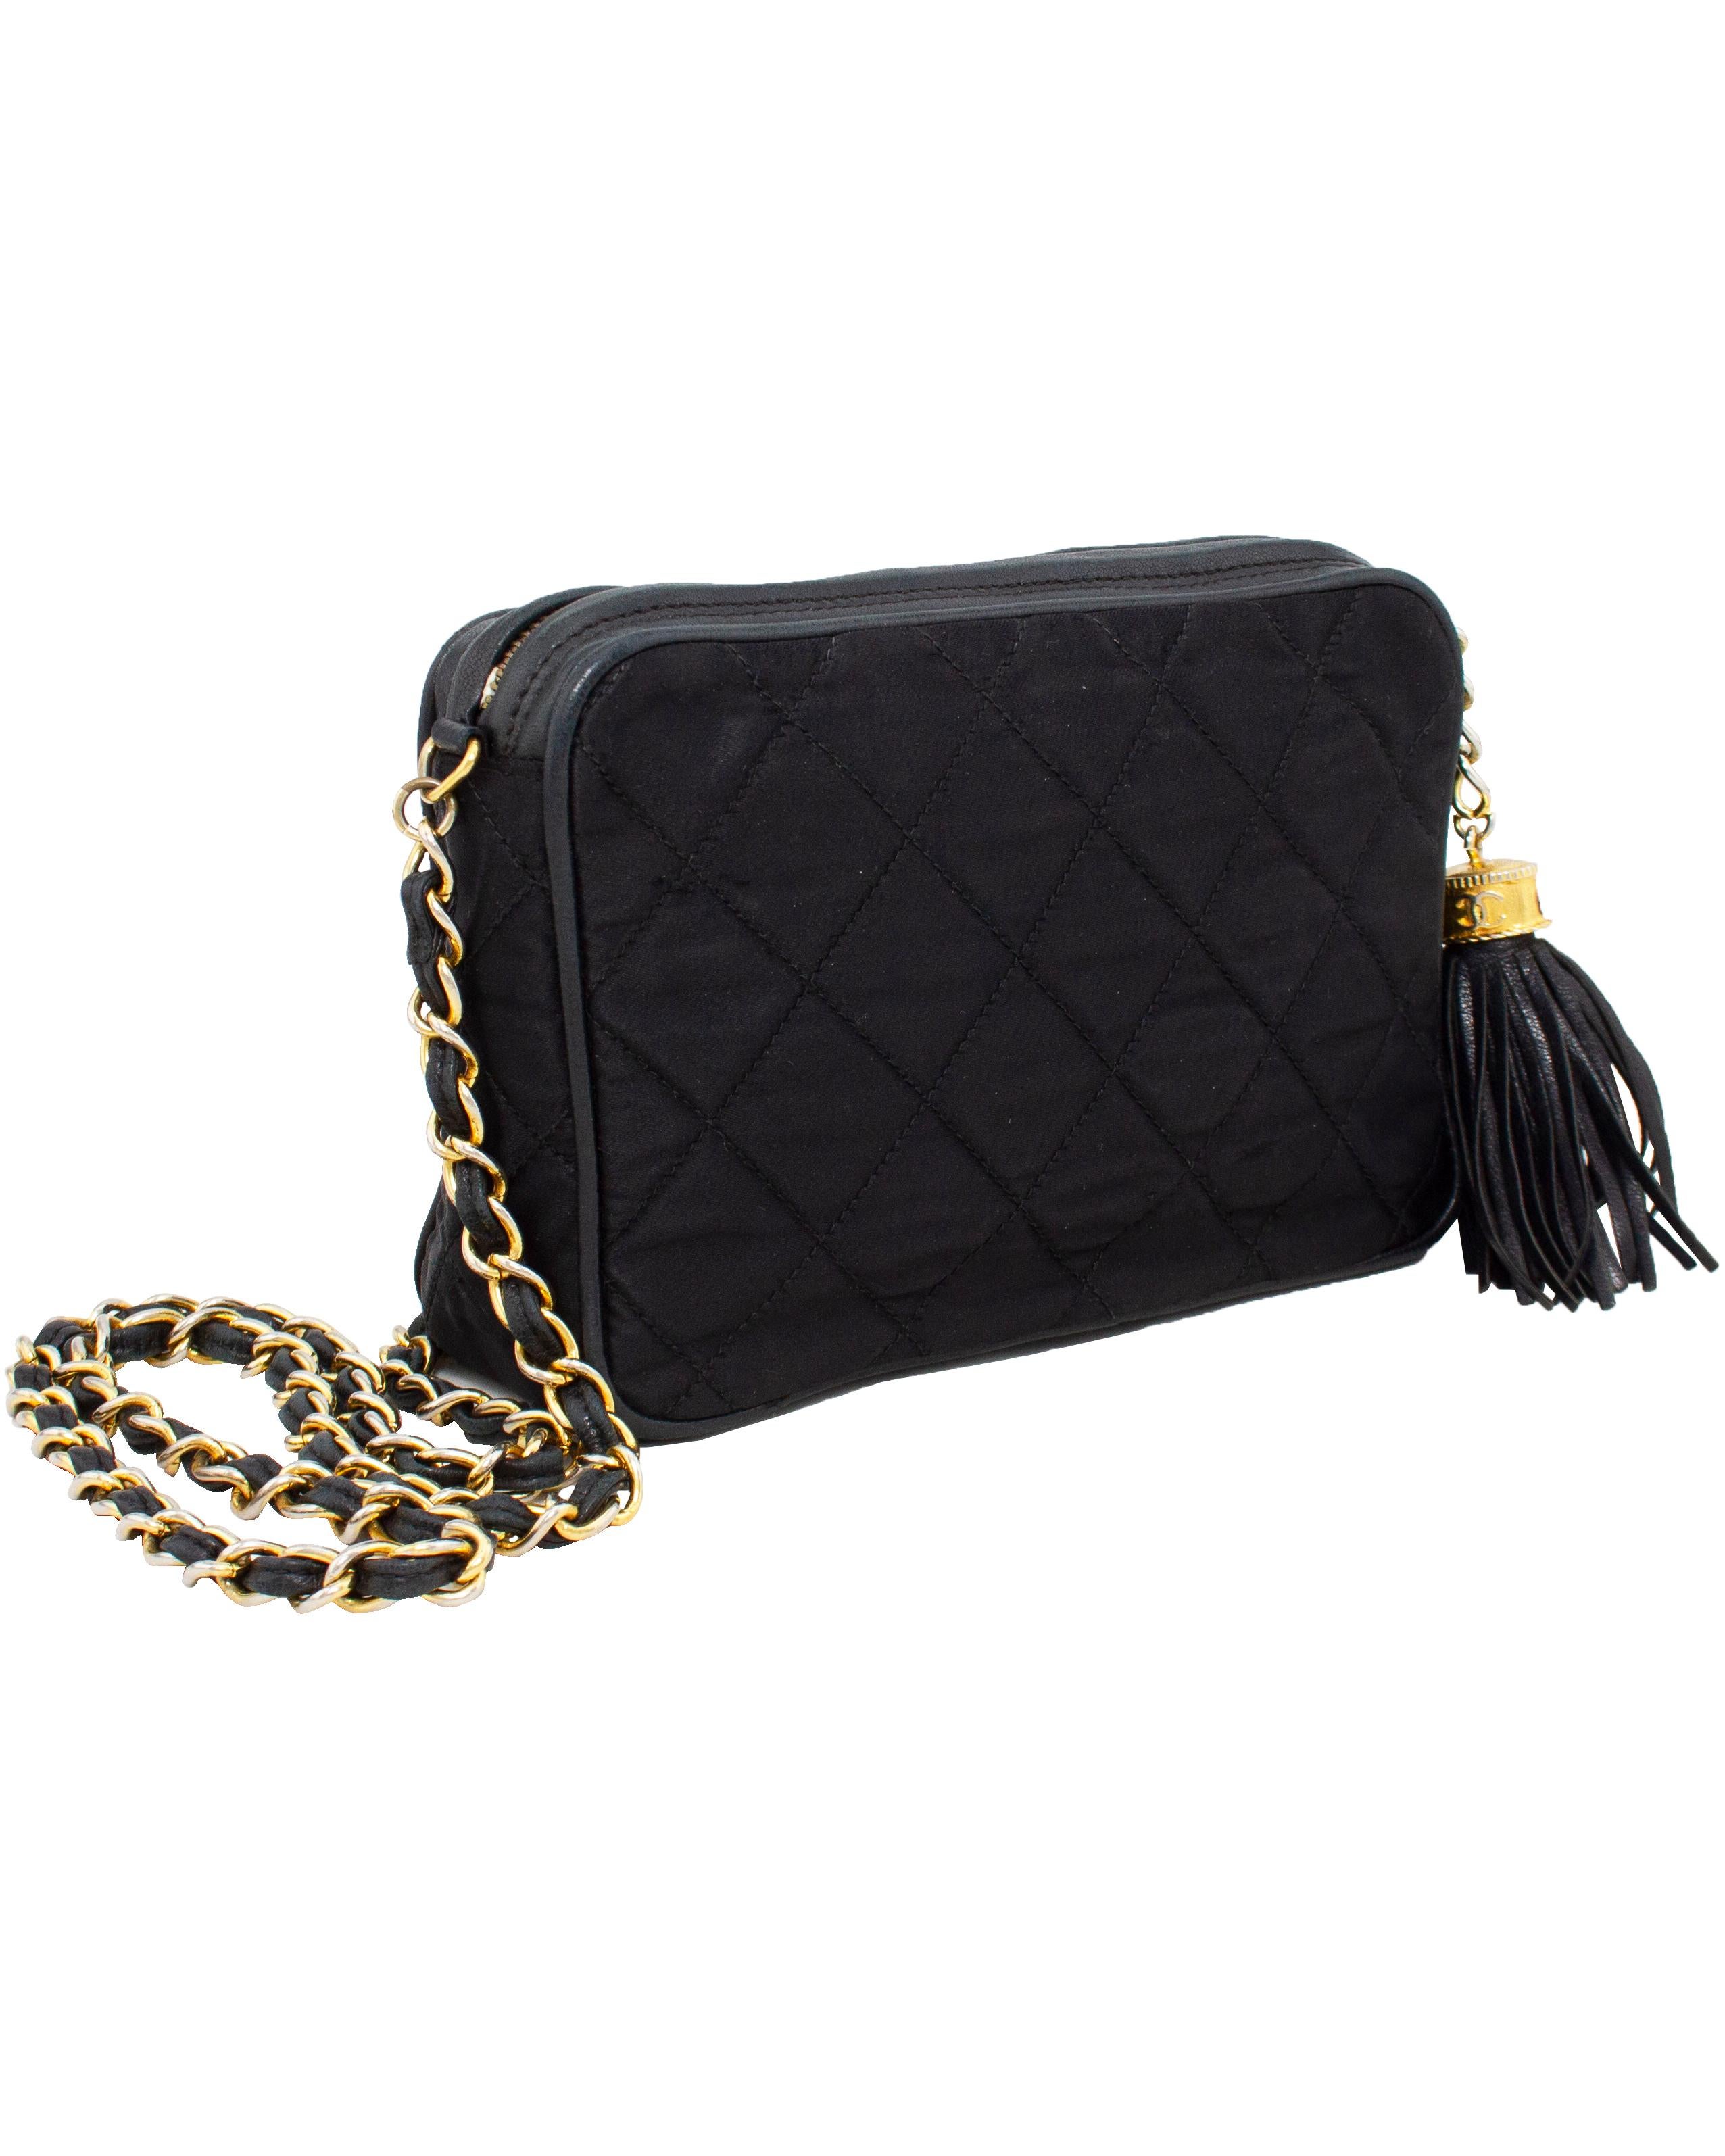 Classic 1980s Chanel black satin quilted evening bag with leather trim. The bag is in overall good vintage condition. There is visible wear on the leather trim and some of the goldplate has been rubbed off throughout. There are no tears or rips and